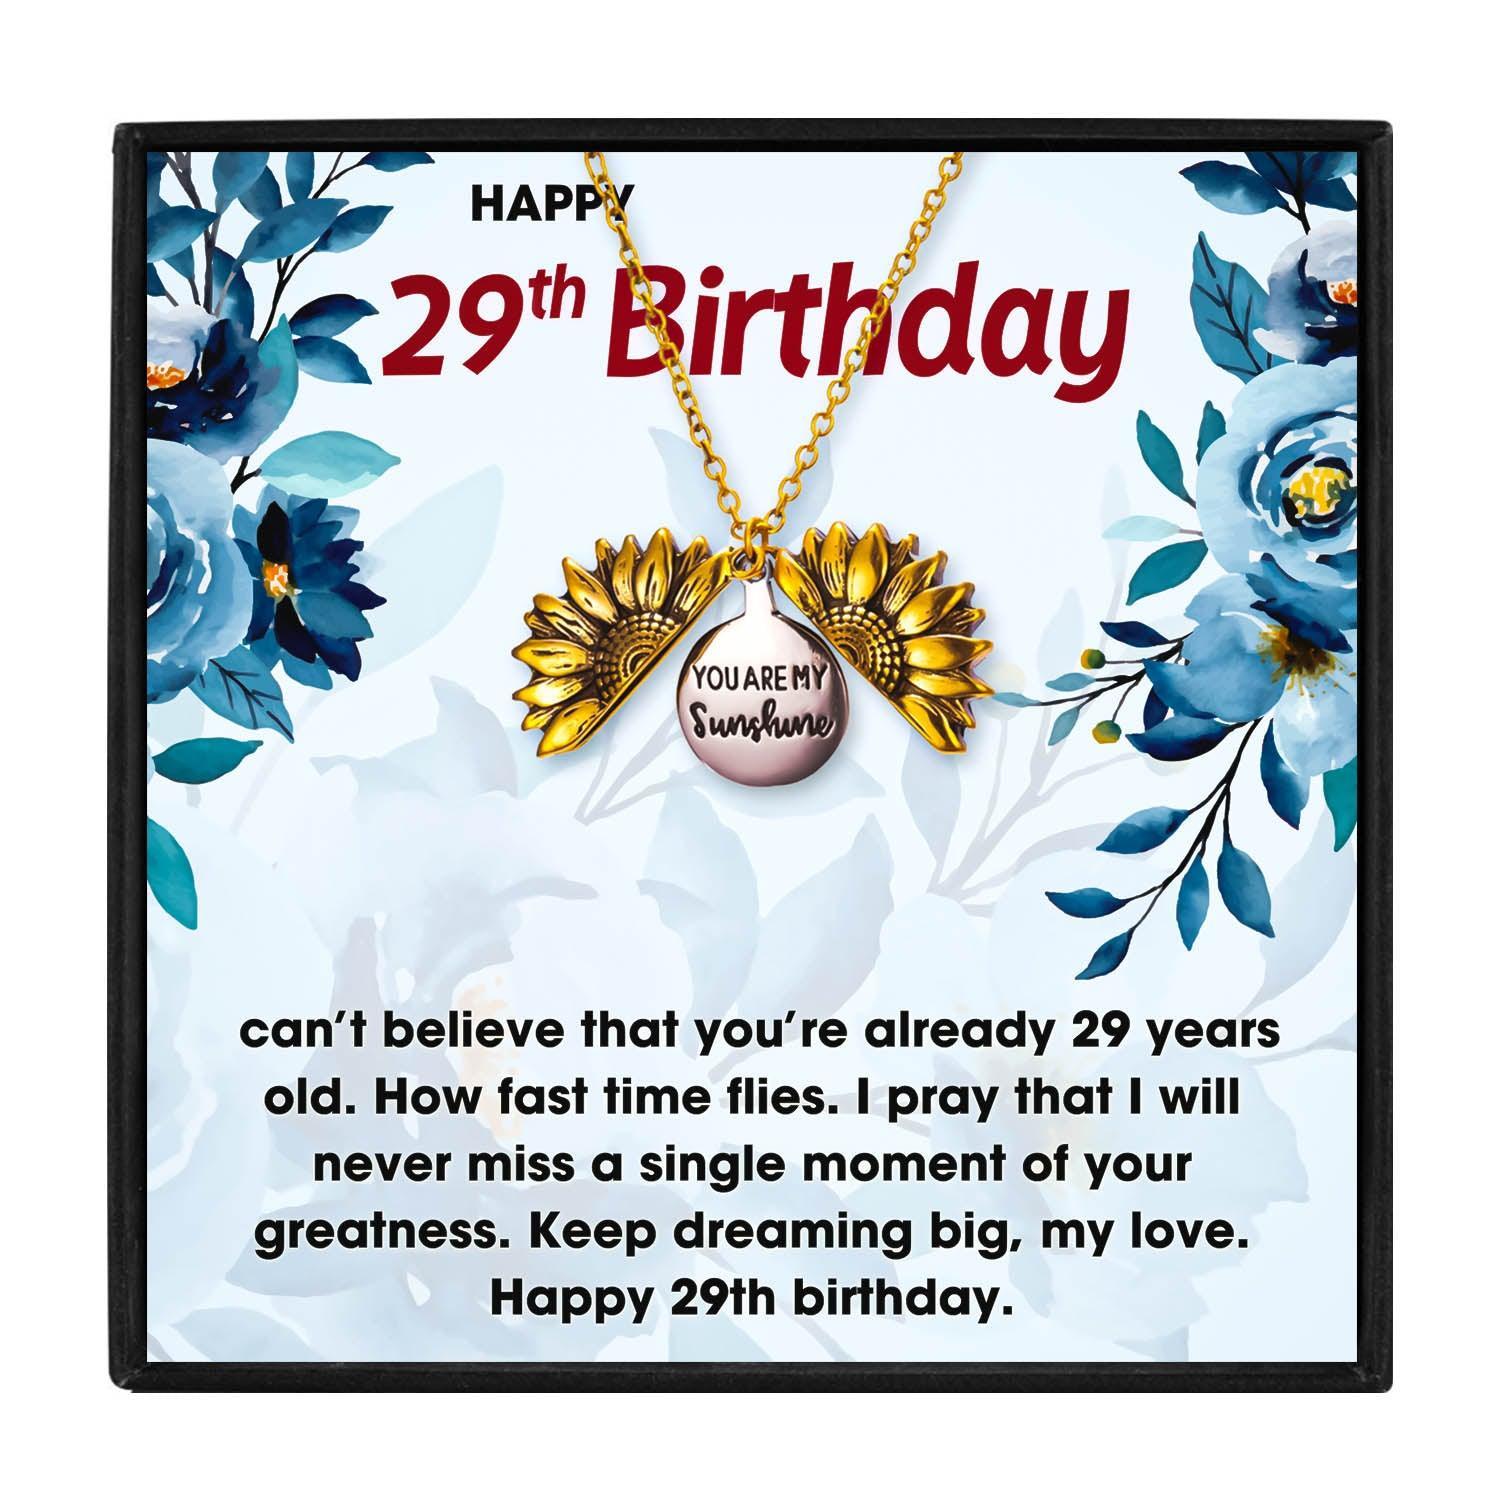 29th Birthday Gifts to Brighten Her Day in 2023 | 29th Birthday Gifts to Brighten Her Day - undefined | 29 birthday gift, 29 birthday present ideas, 29th birthday ideas for her | From Hunny Life | hunnylife.com